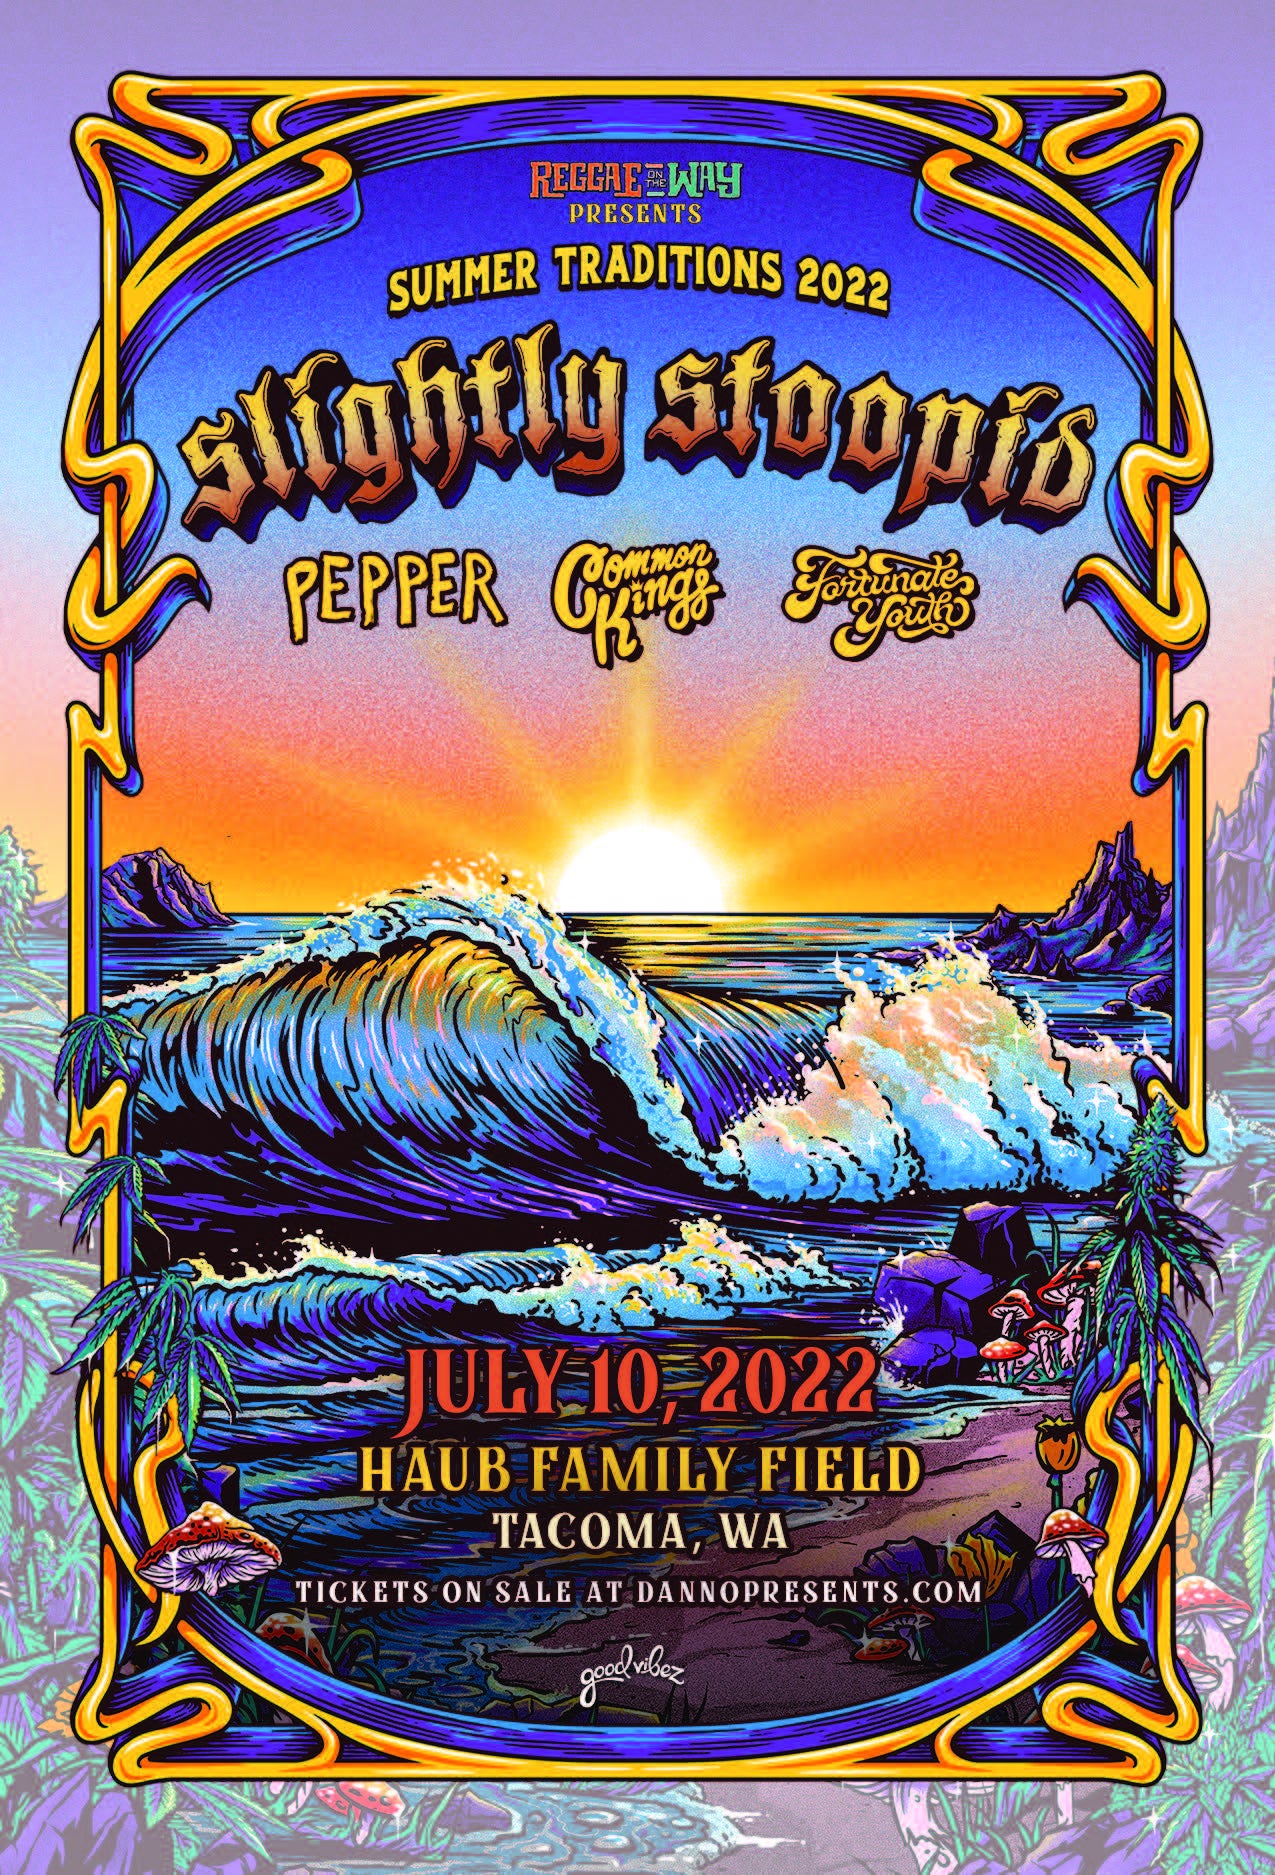 Slightly Stoopid Summer Traditions 2022 Lemay Americas Car Museum